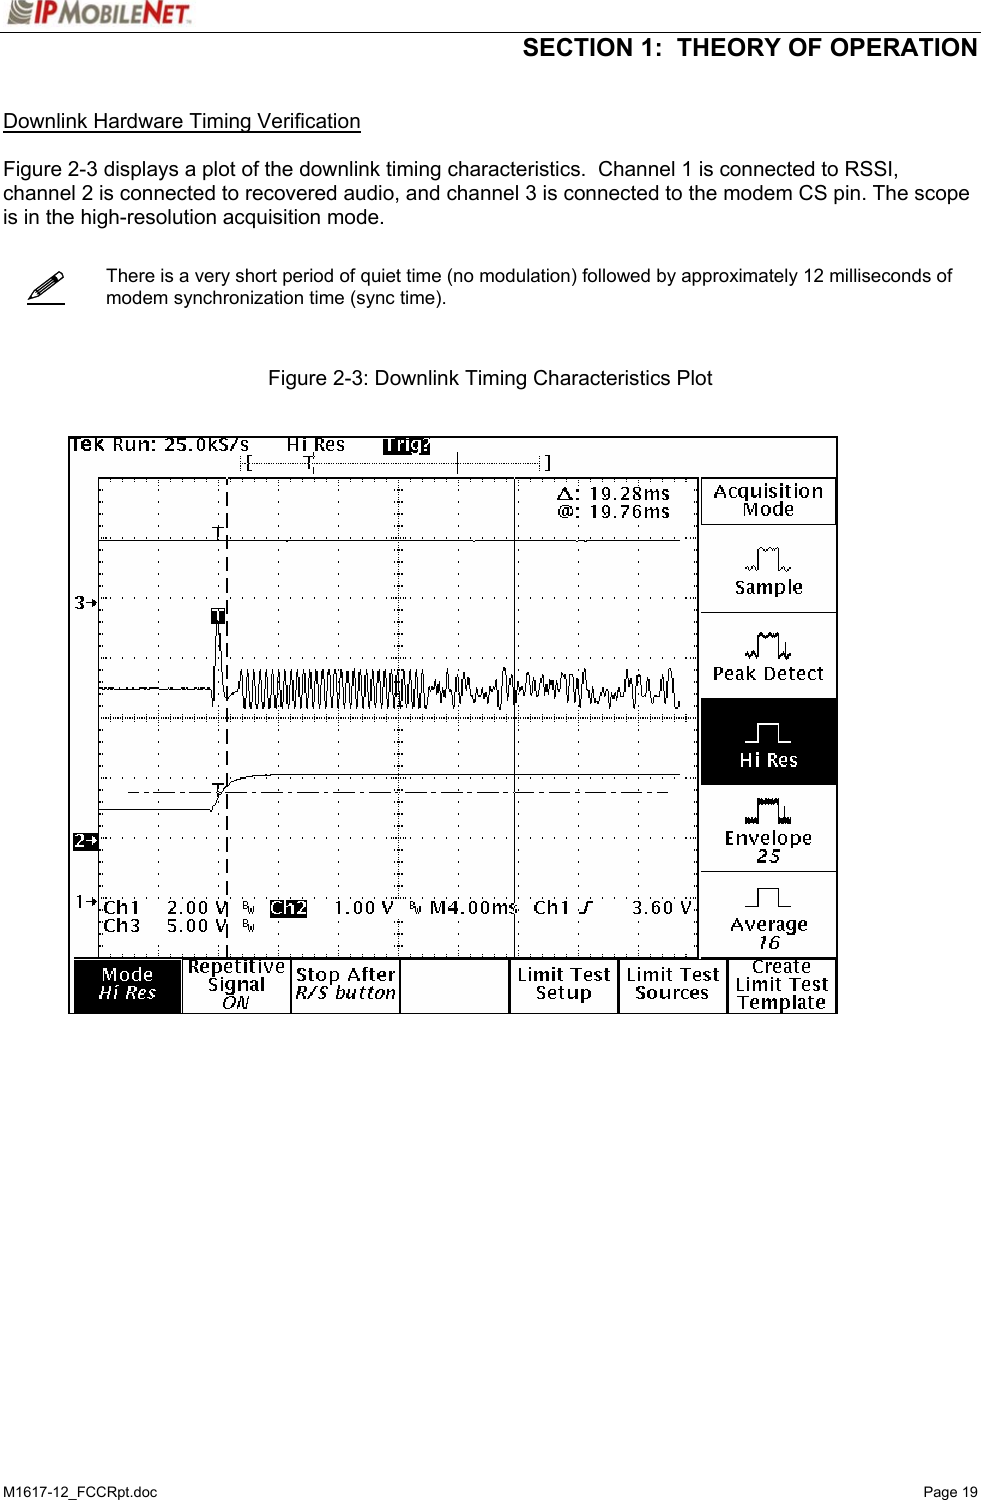  SECTION 1:  THEORY OF OPERATION  M1617-12_FCCRpt.doc   Page 19    Downlink Hardware Timing Verification  Figure 2-3 displays a plot of the downlink timing characteristics.  Channel 1 is connected to RSSI, channel 2 is connected to recovered audio, and channel 3 is connected to the modem CS pin. The scope is in the high-resolution acquisition mode.      There is a very short period of quiet time (no modulation) followed by approximately 12 milliseconds of modem synchronization time (sync time).    Figure 2-3: Downlink Timing Characteristics Plot       